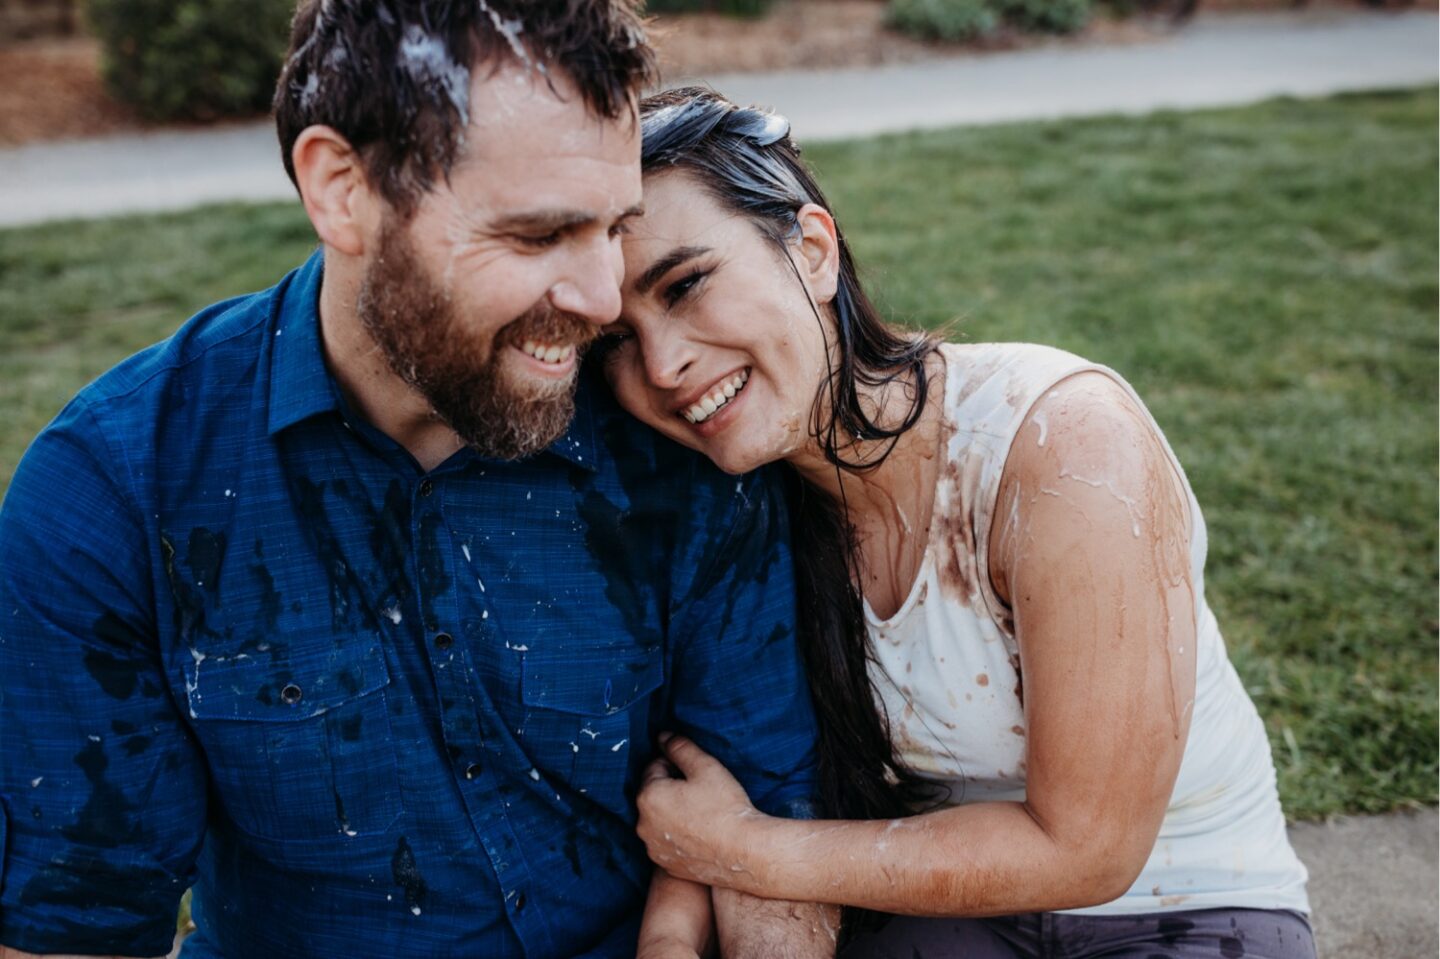 Woman leans her head on her fiance's shoulder as they're both covered in ice cream after their ice cream food fight.